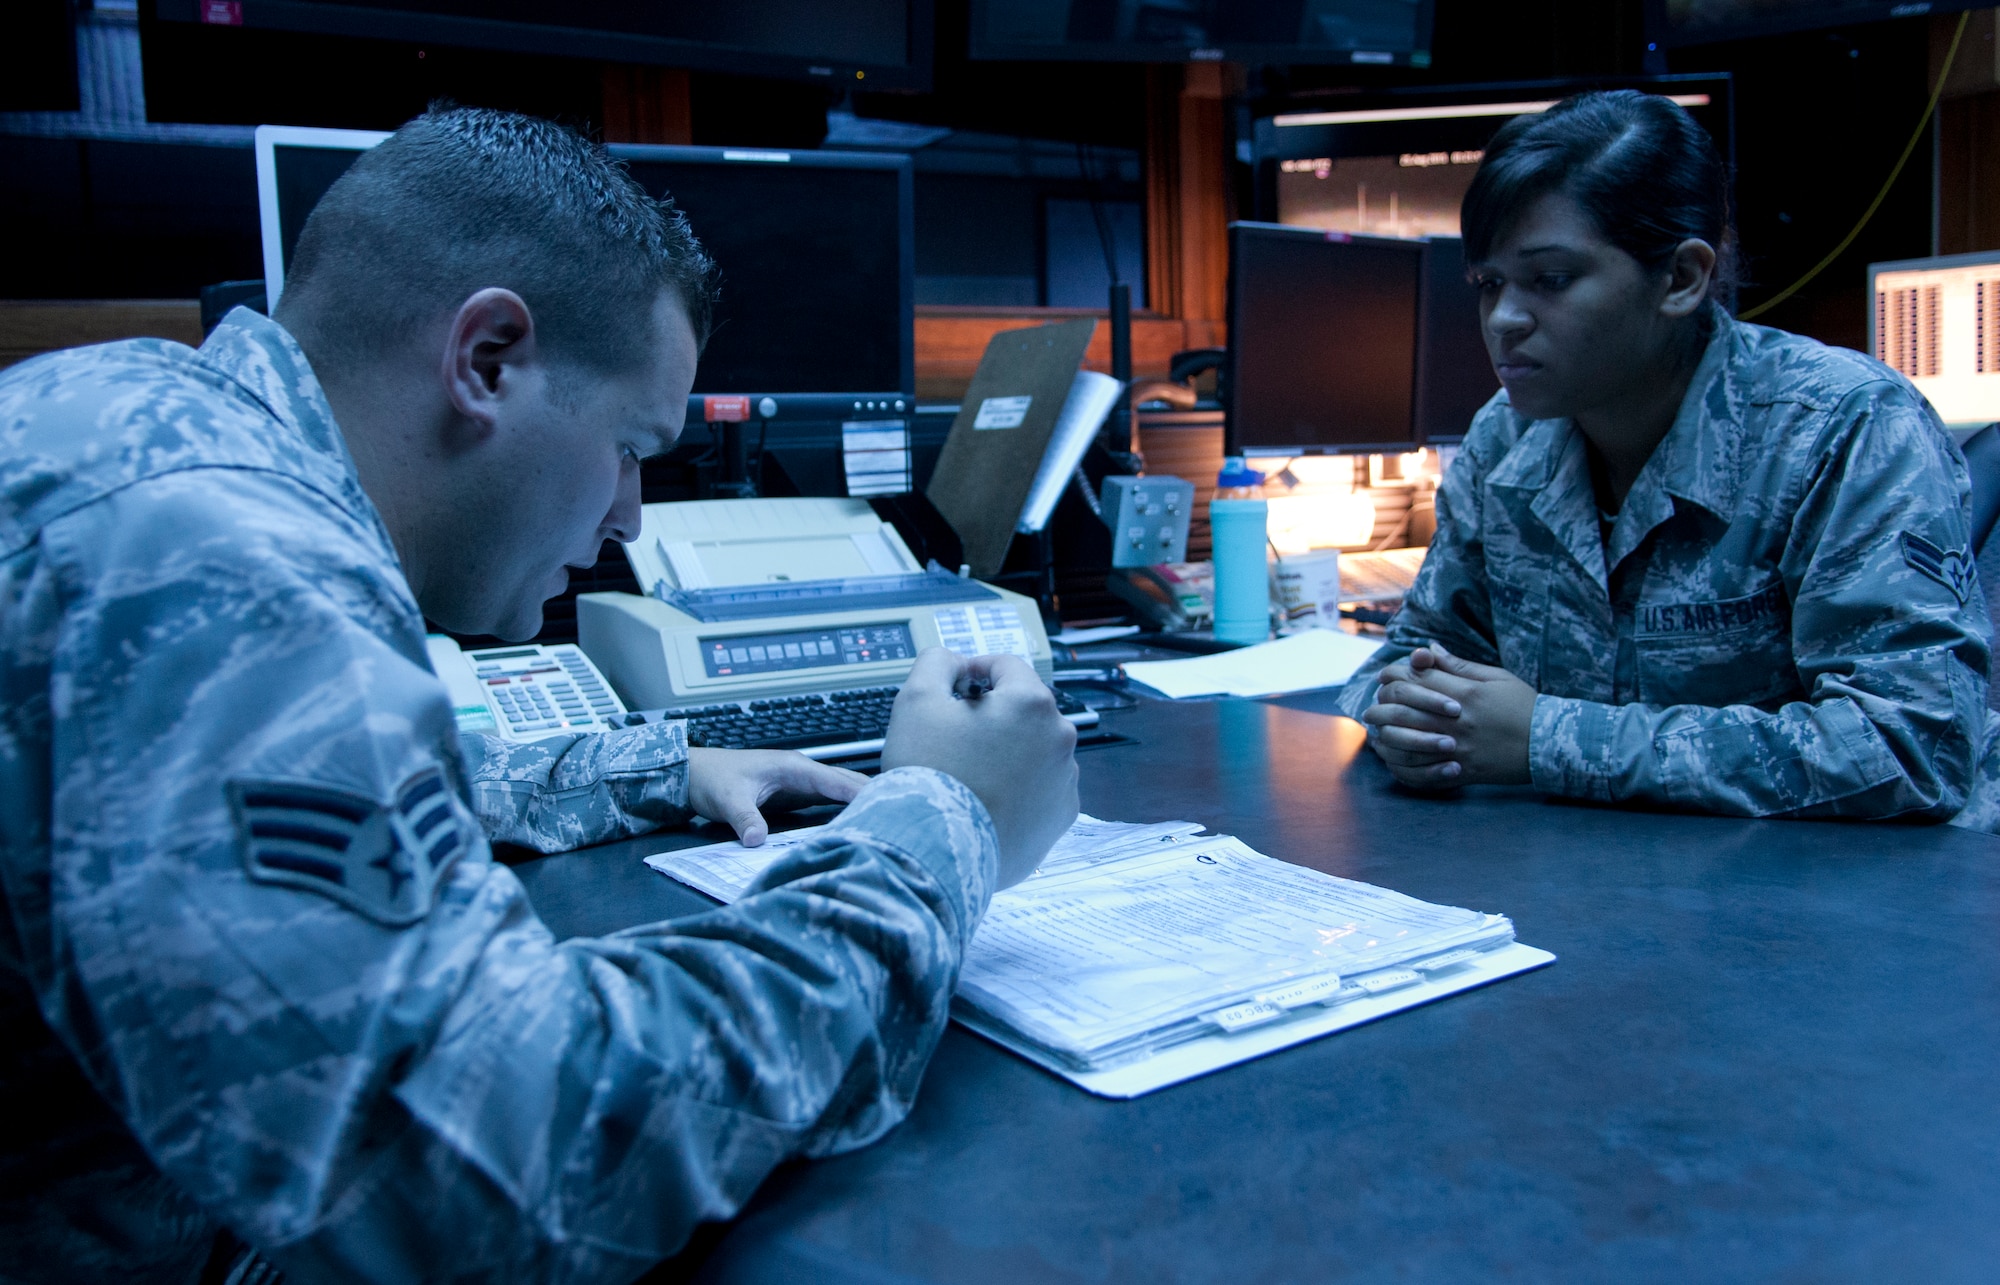 Senior Airman Zachary Pirrung, 90th MW Command Post senior emergency action controller, goes over the daily checklist with Airman 1st Class Chanel Cummings, his junior emergency action controller at 1:21 a.m., Aug. 25, 2015, in the command post. The lights in the secured area are tinted blue to calm the crew members and limit glare on checklists and other documents used in the facility. (U.S. Air Force photo by Airman 1st Class Malcolm Mayfield)